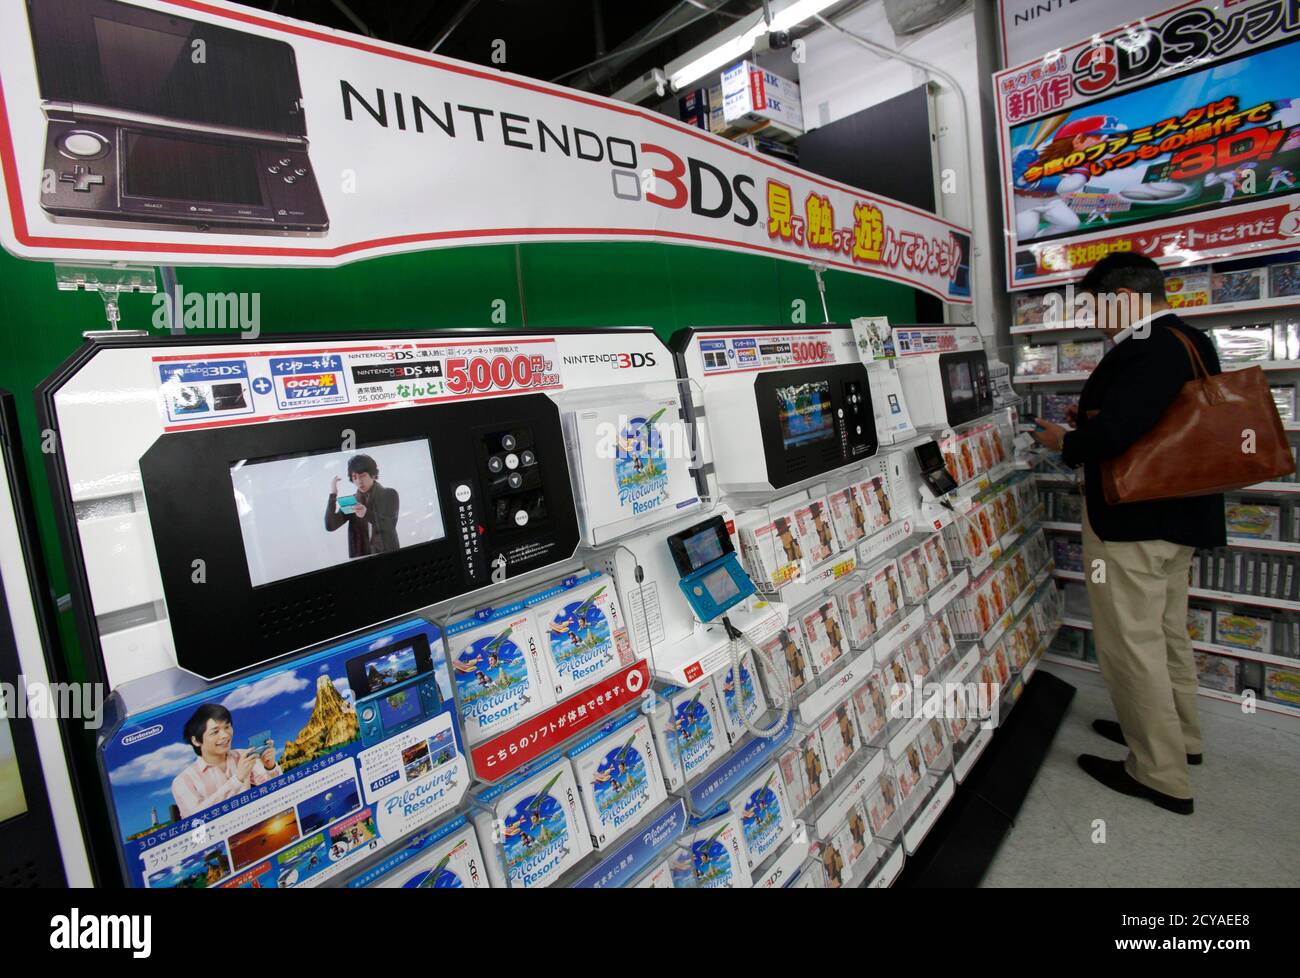 A man tries out Nintendo's 3DS game player at an electronic store in Tokyo  April 25, 2011. Japan's Nintendo Co posted its second straight fall in  annual profit on Monday, as sales